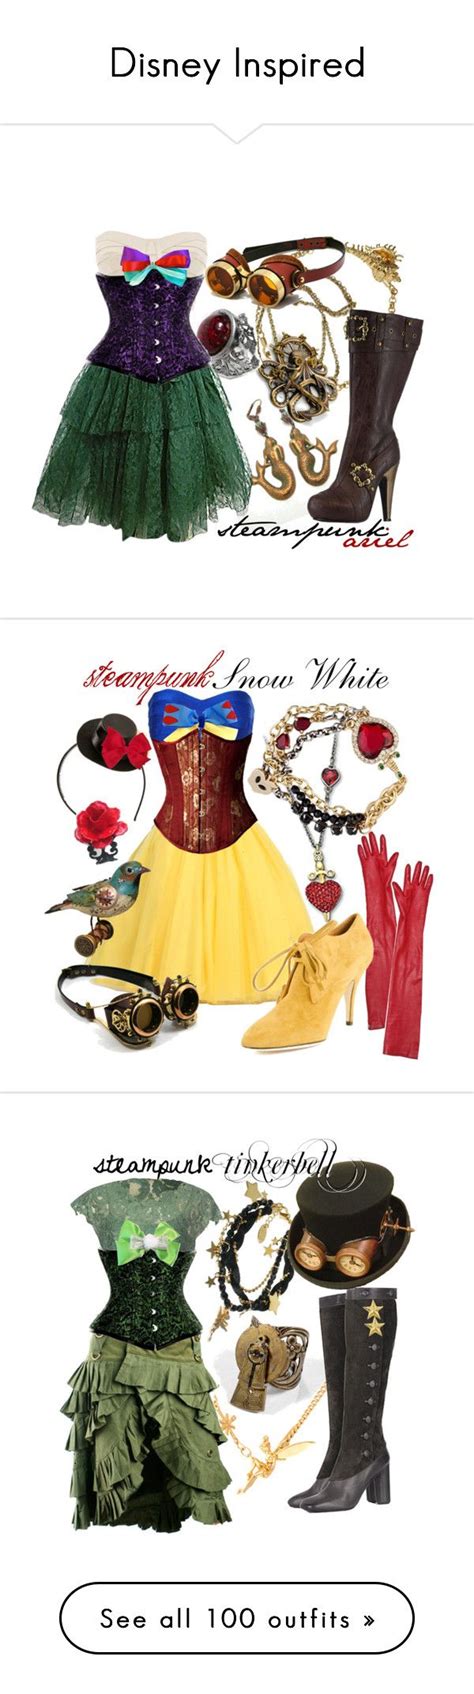 disney inspired disney couture disney inspired clothes design